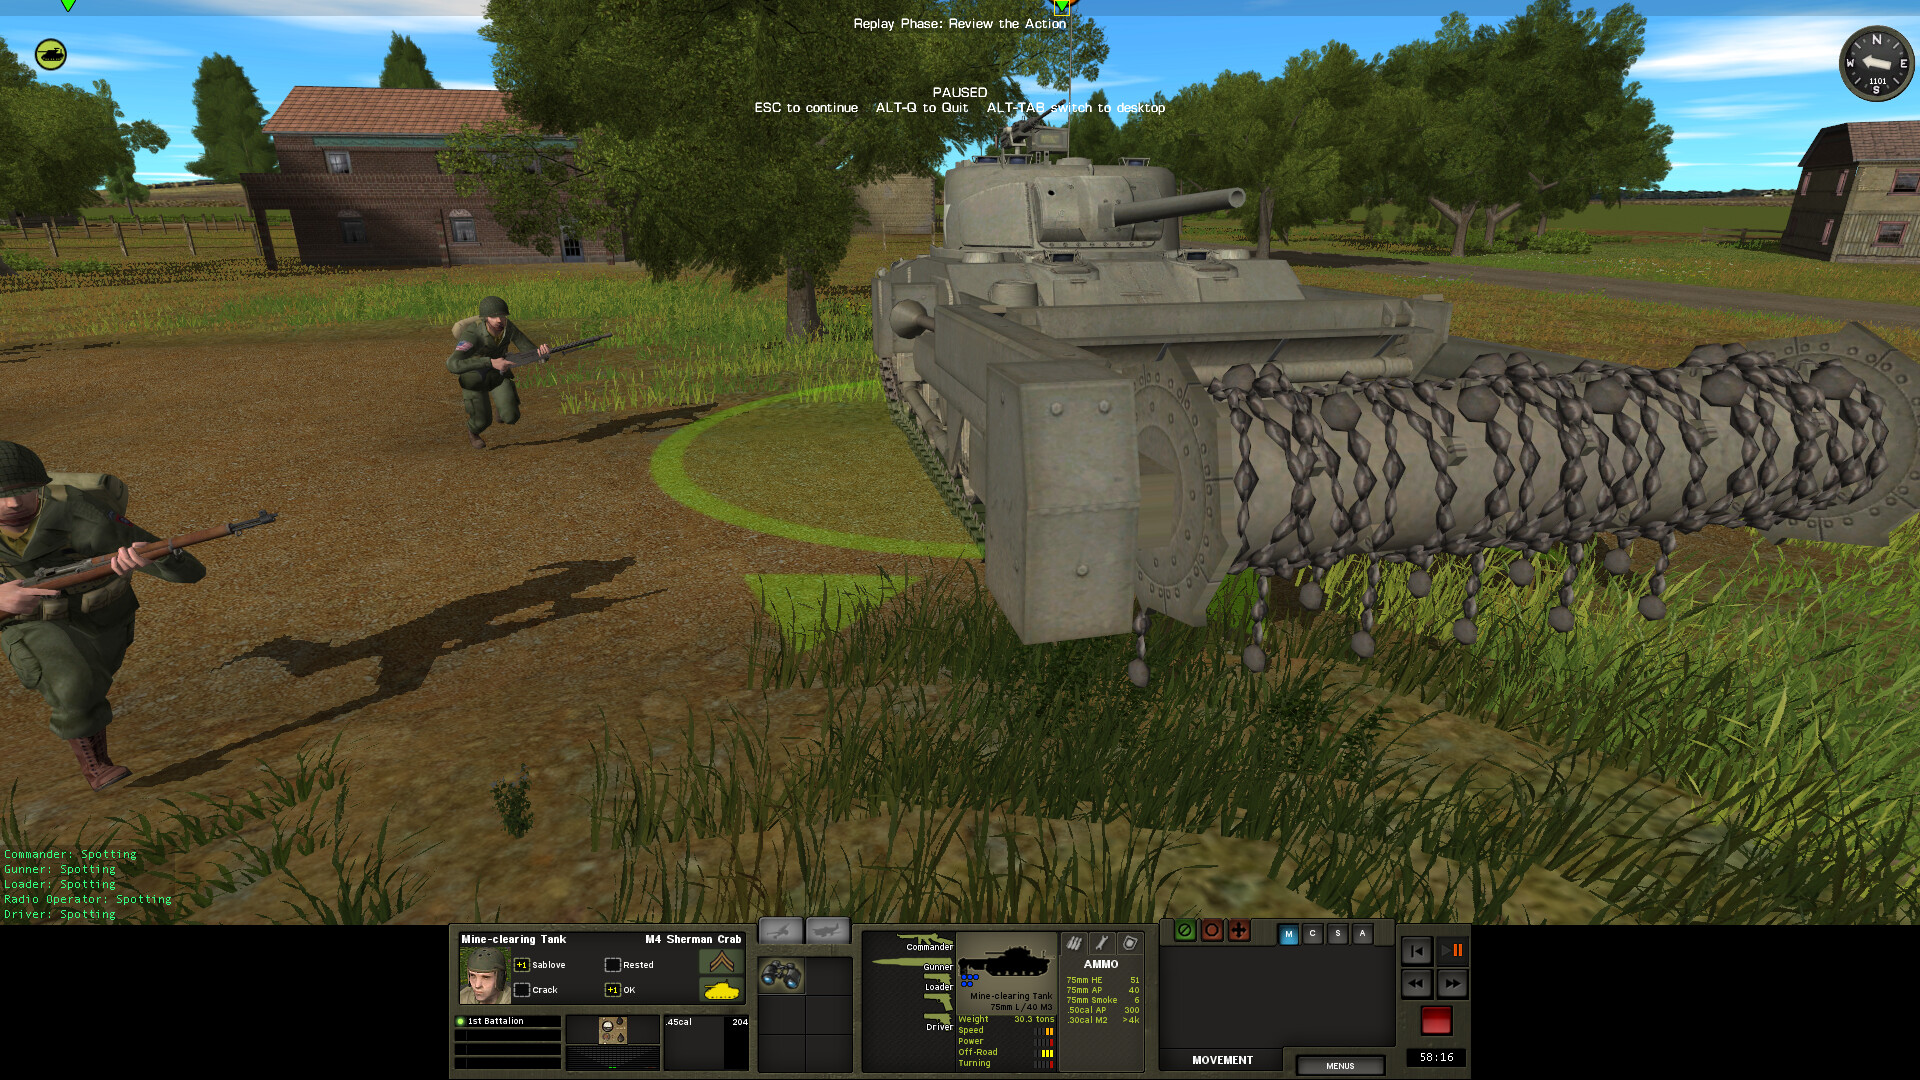 Combat Mission: Battle for Normandy - Vehicle Pack DLC Steam CD Key 8.95 $